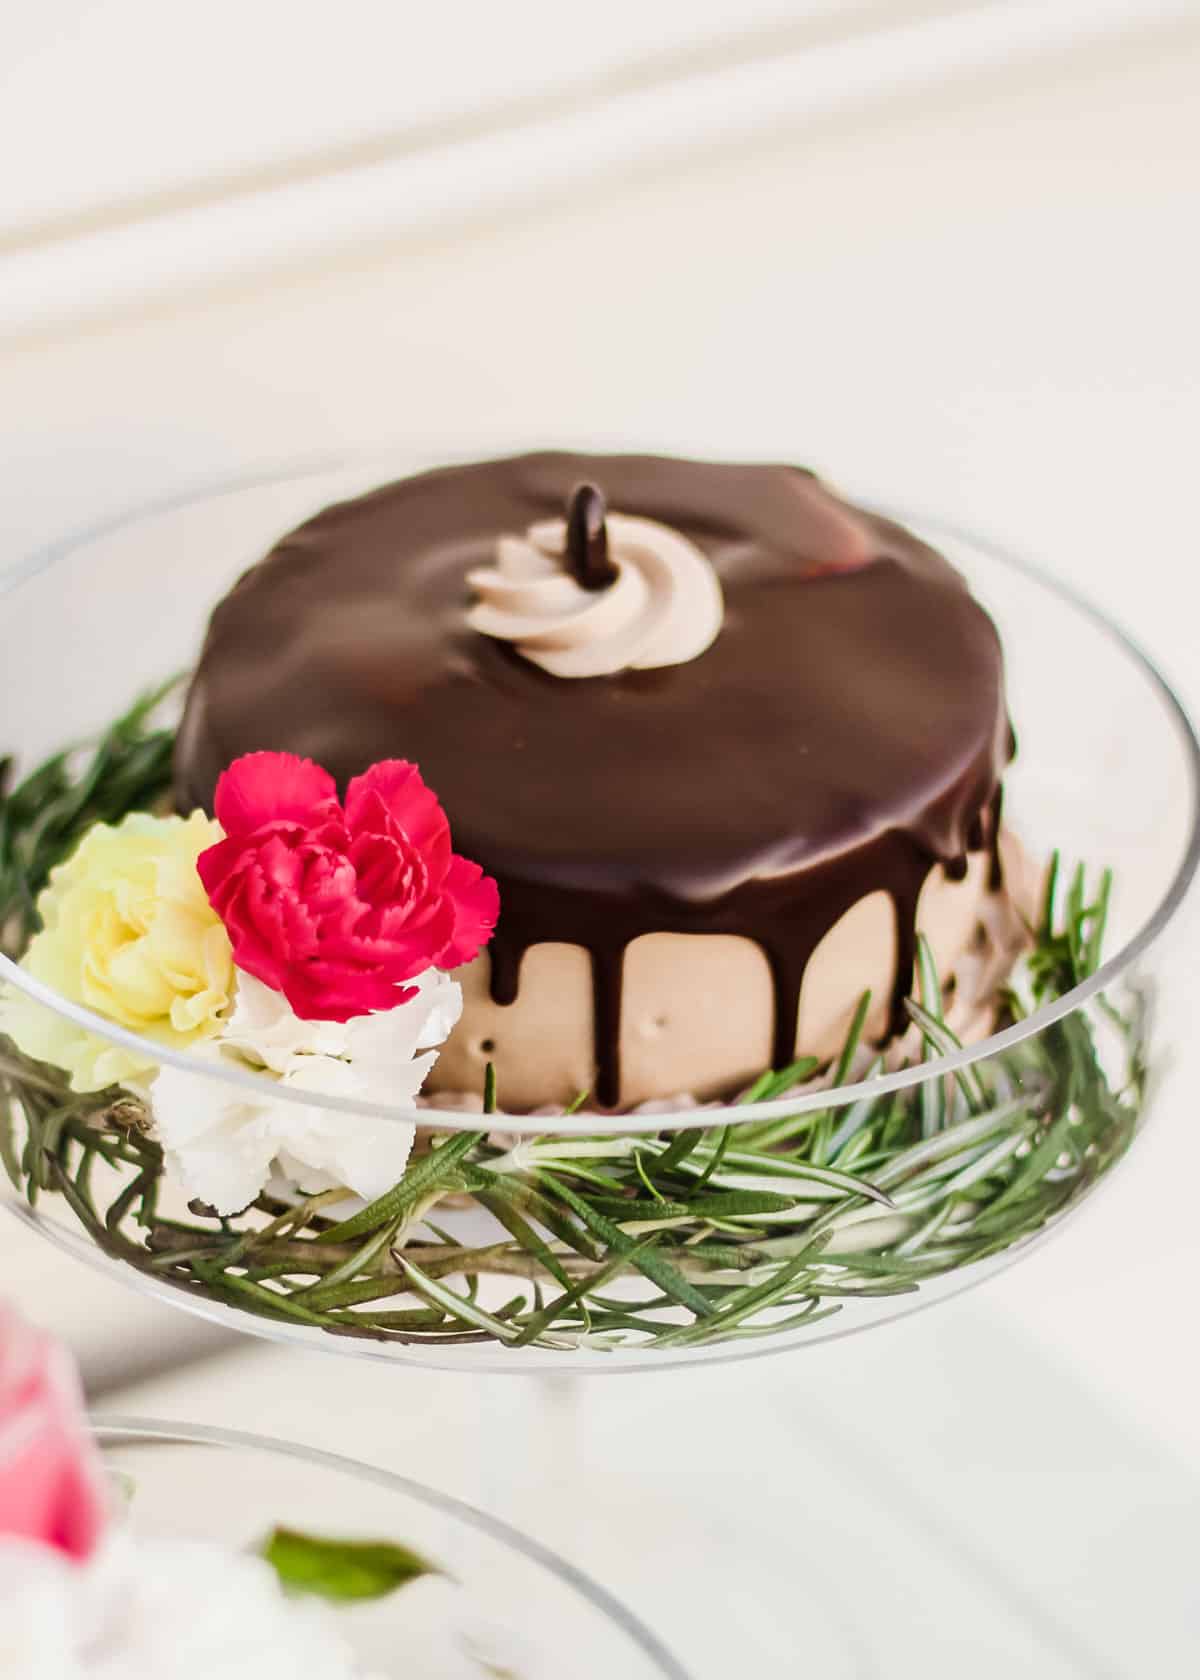 chocolate mini cake on glass pedestal with fresh flowers on the side.